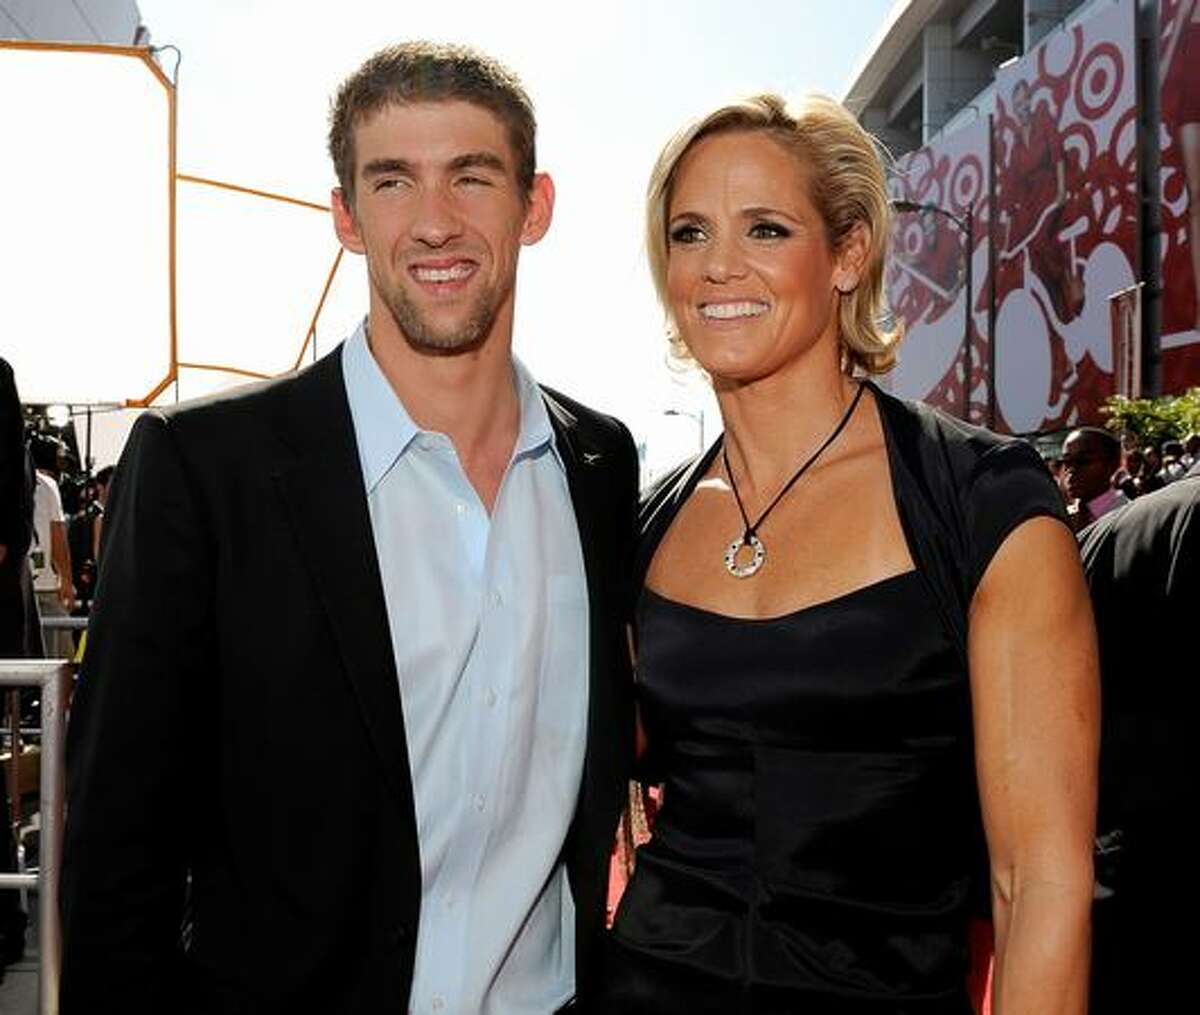 Olympic swimmers Michael Phelps and Dara Torres arrive. (Photo by Kevork Djansezian/Getty Images for ESPY